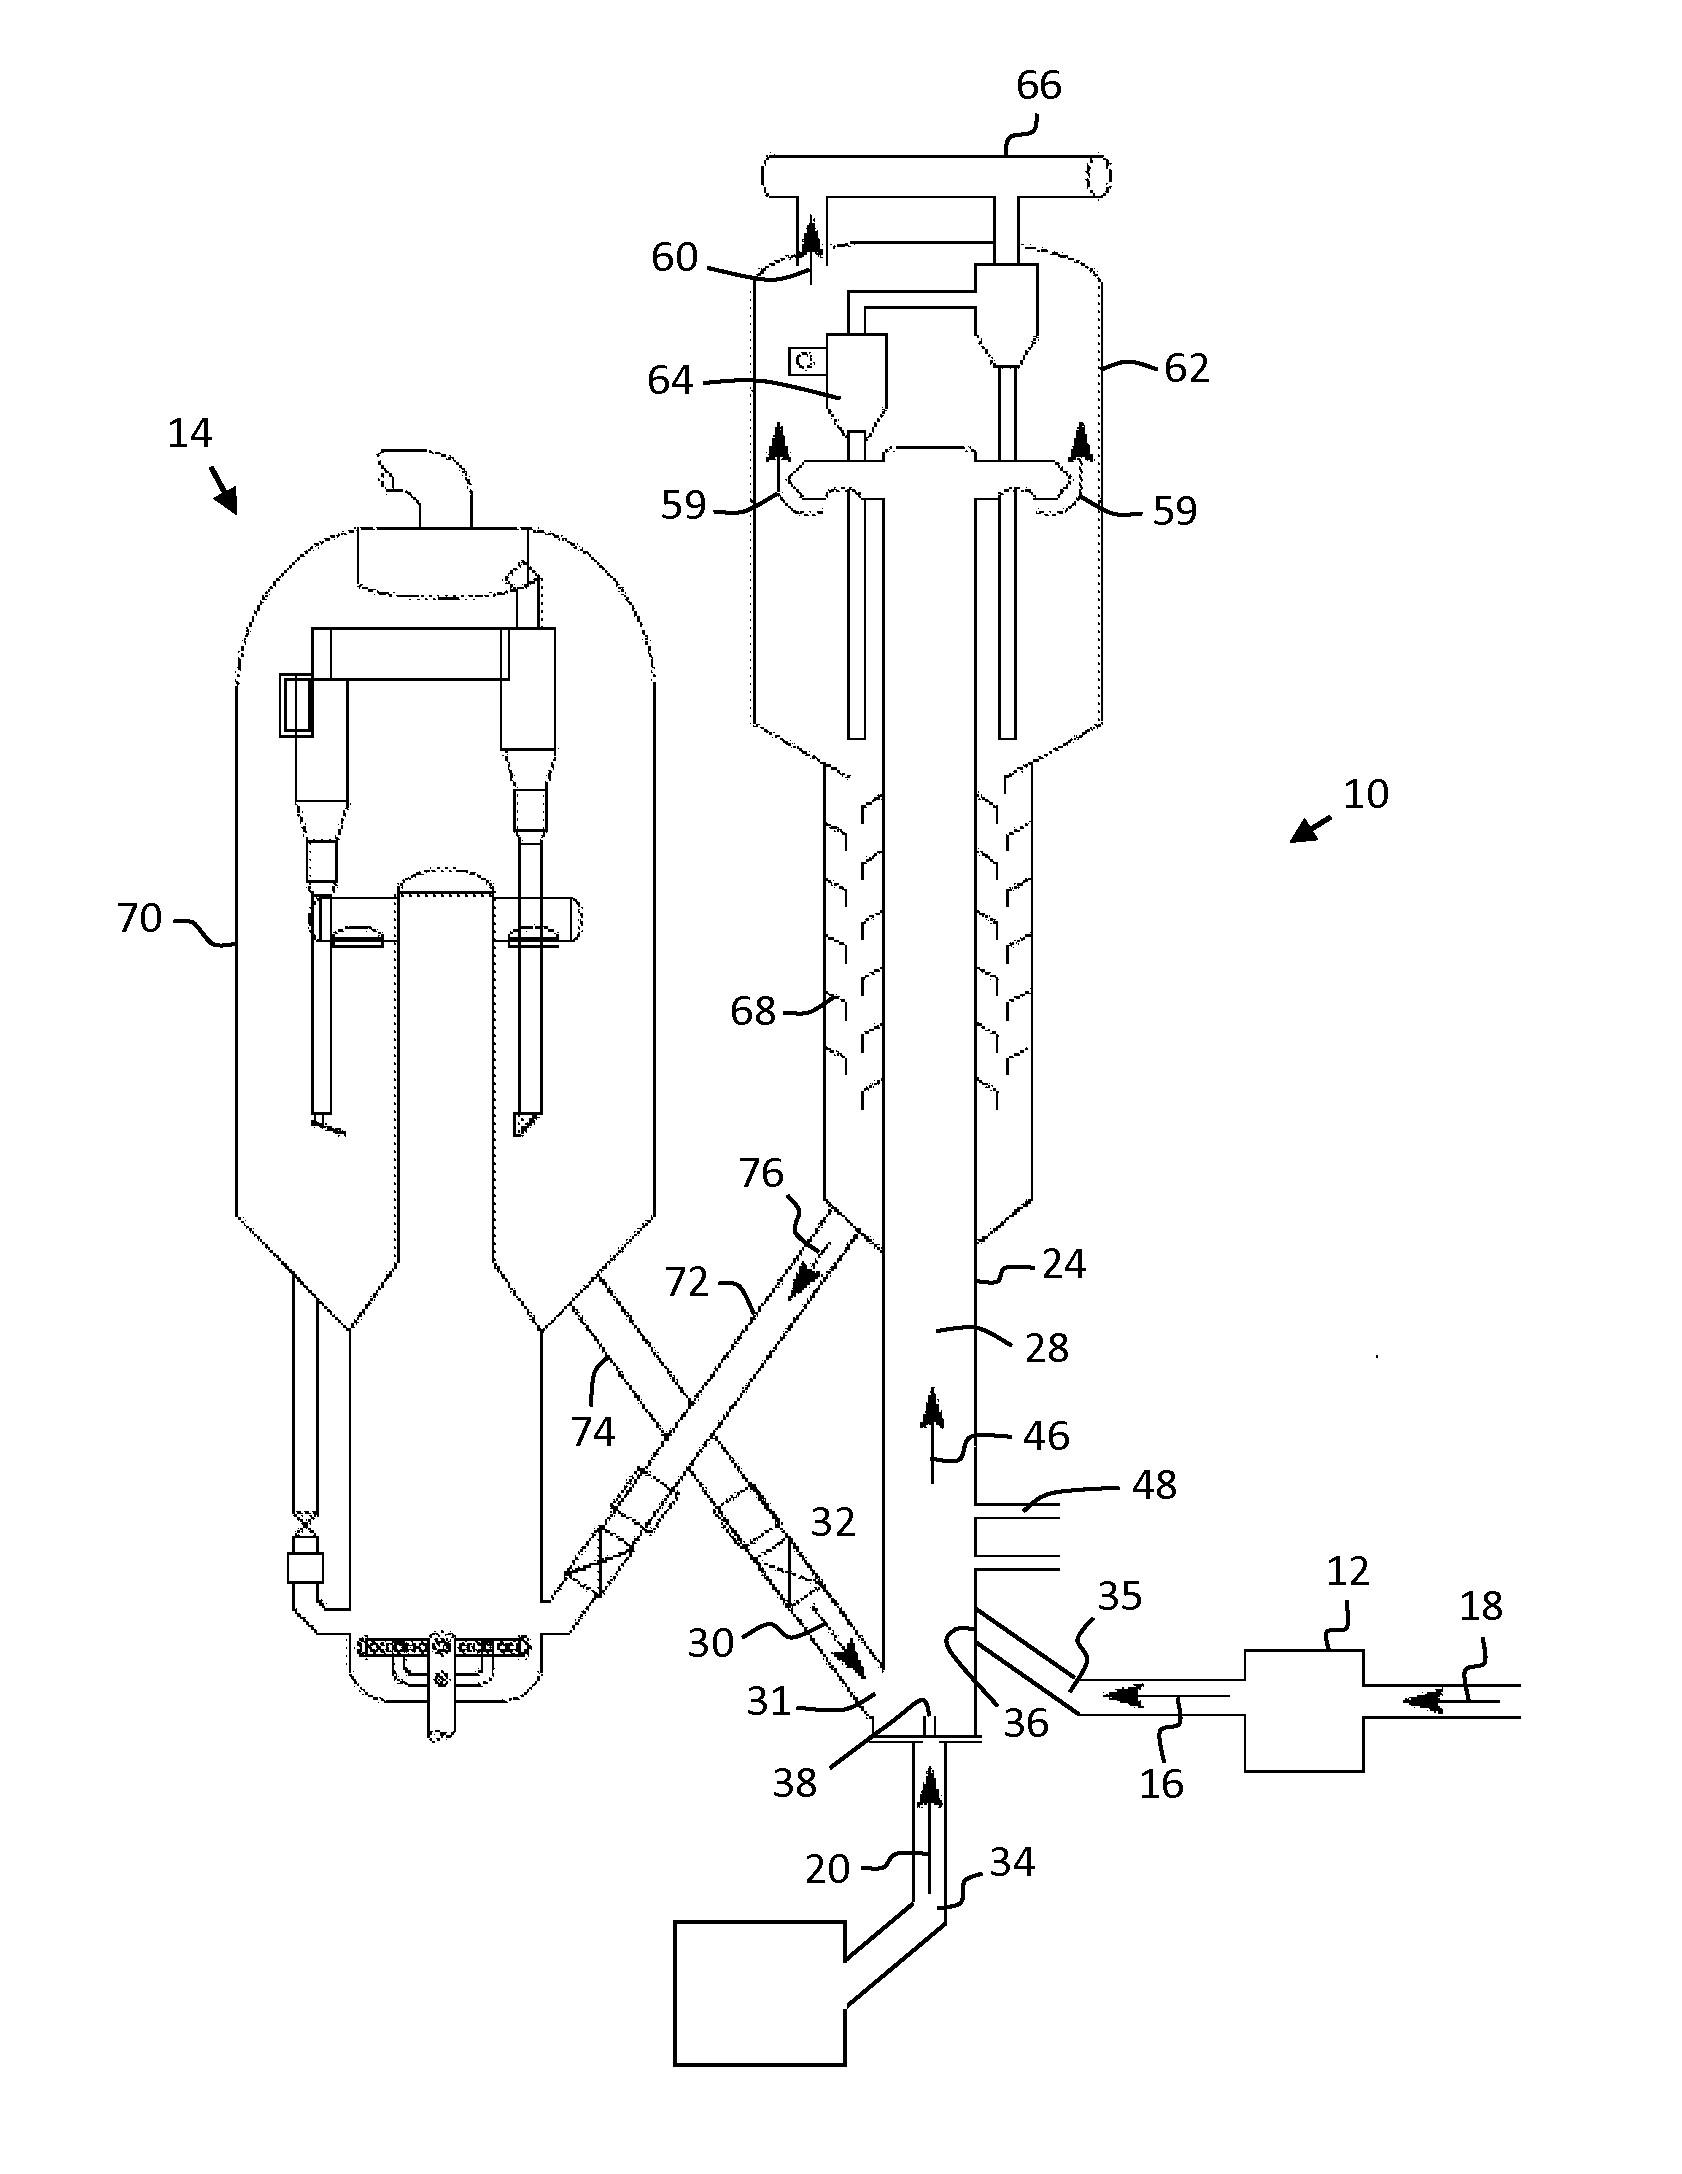 Fcc units, apparatuses and methods for processing pyrolysis oil and hydrocarbon streams